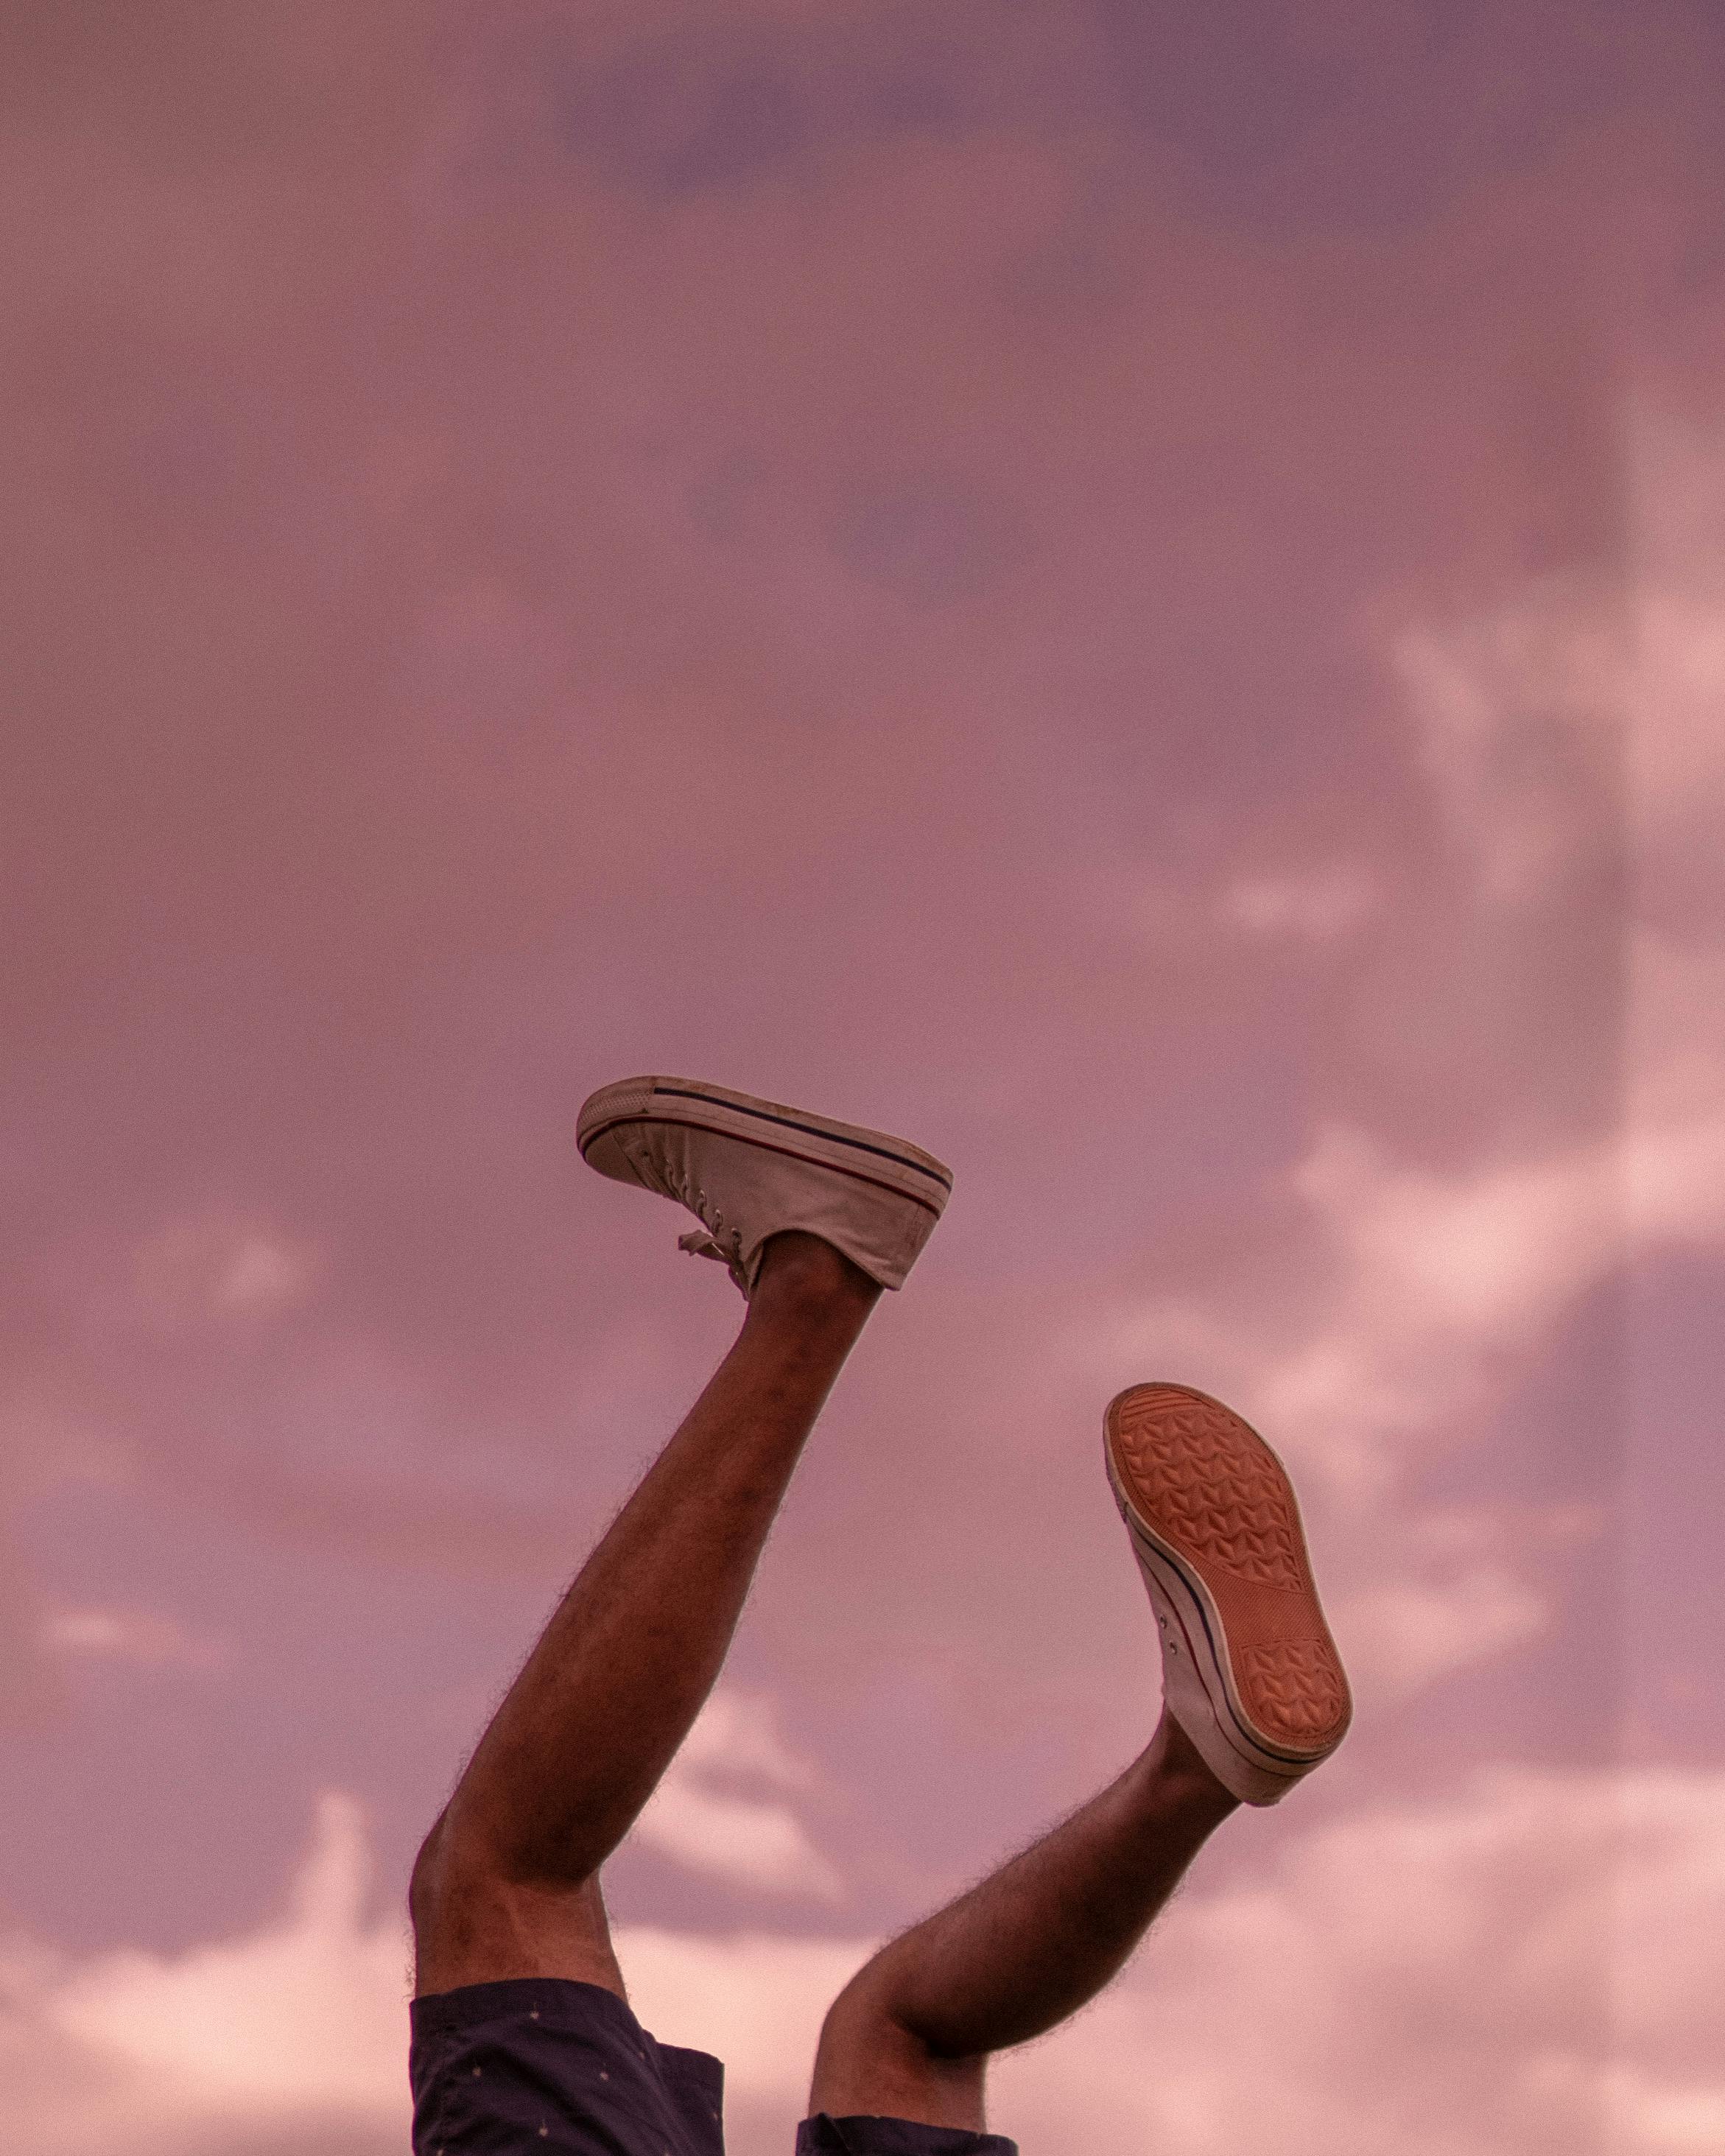 person wearing brown shoes jumping